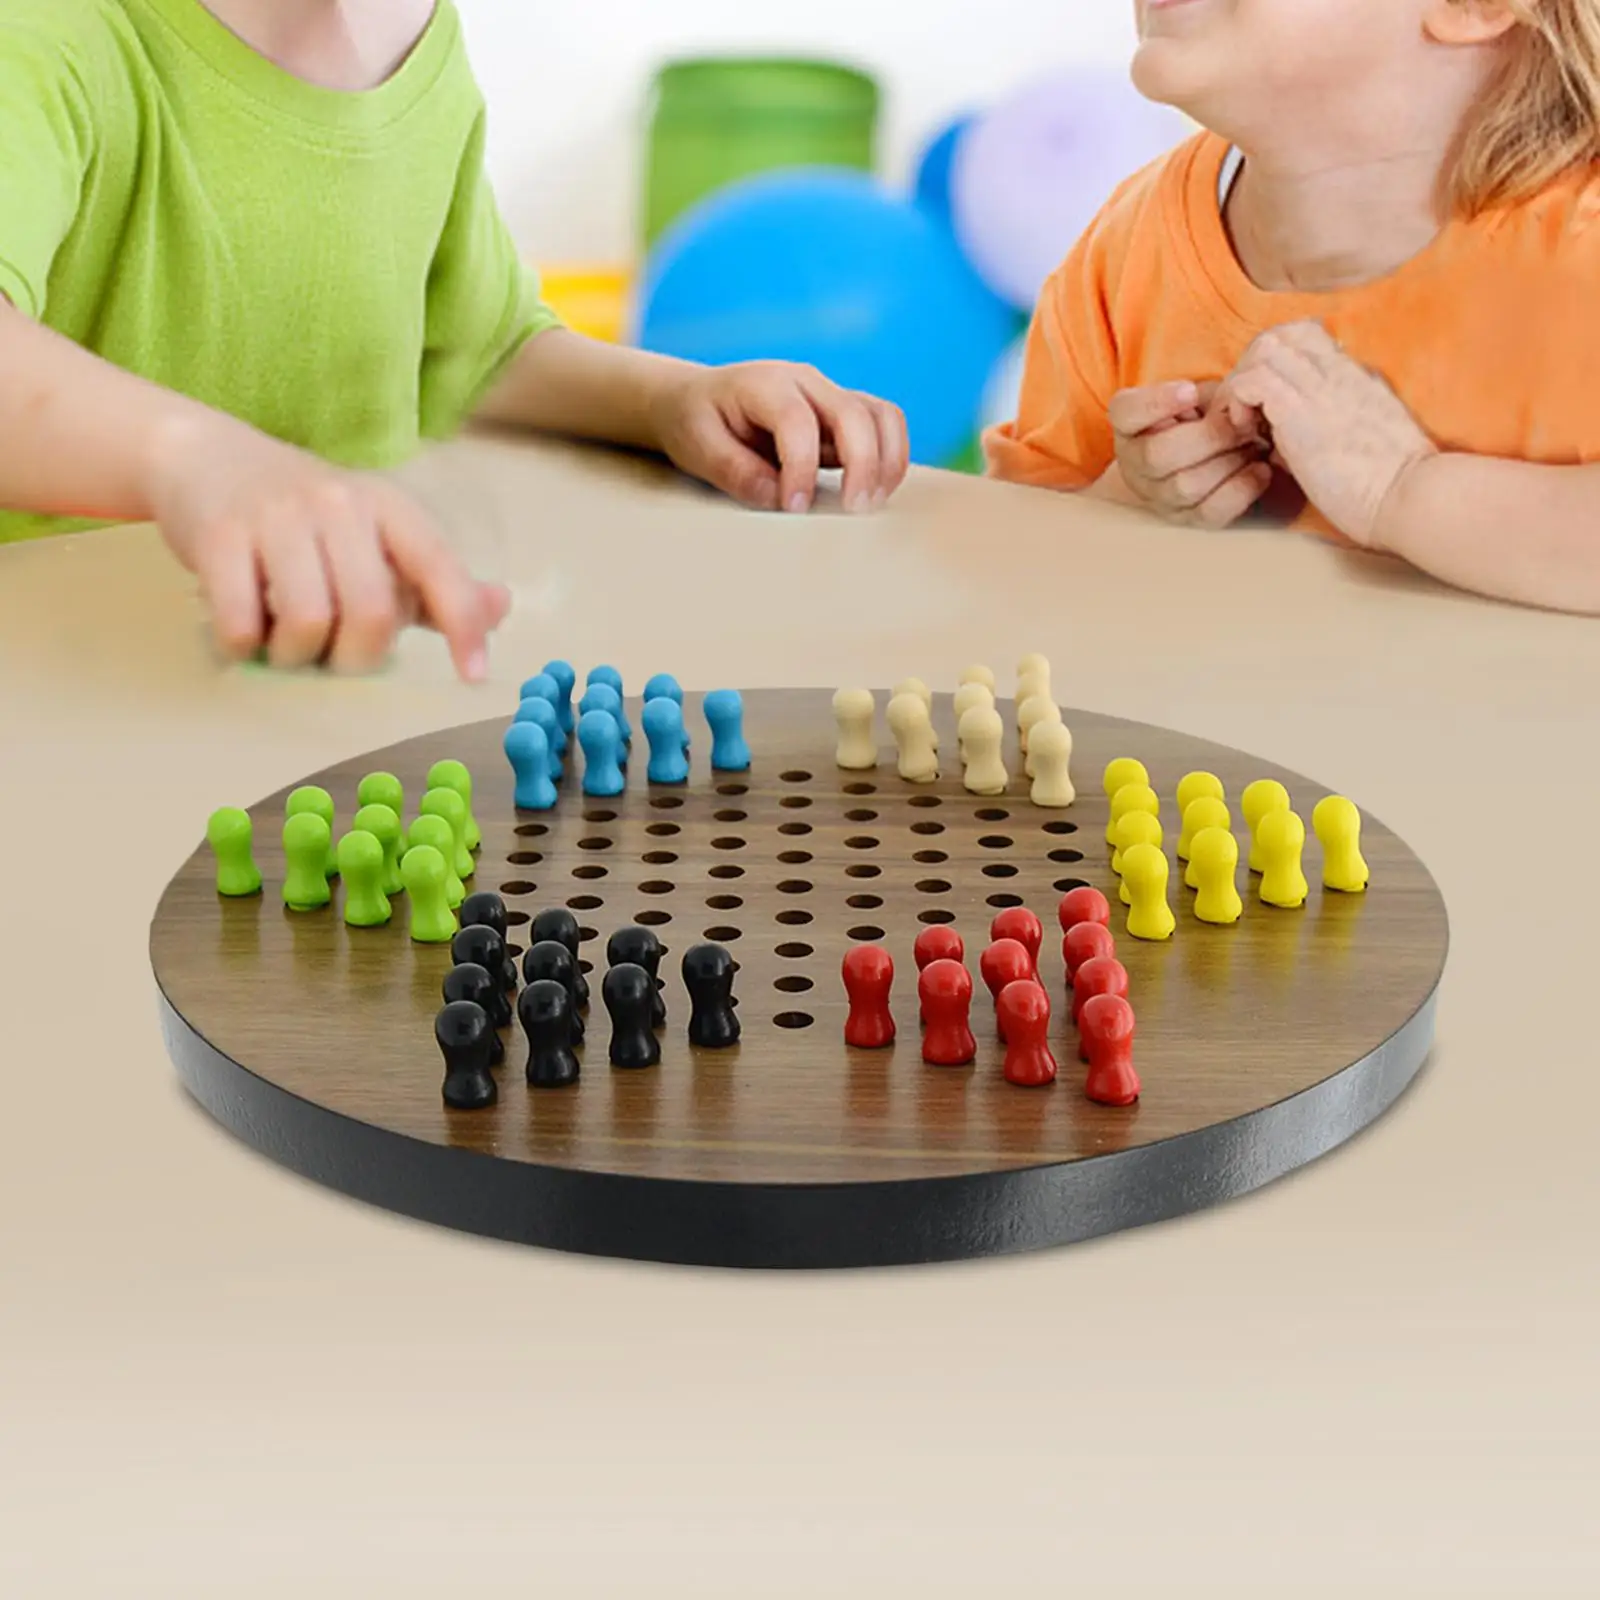 Chinese Checkers Game Preschool Learning Activities Toy Chinese Checkers Game Set Chinese Checkers with Marbles for Preschool